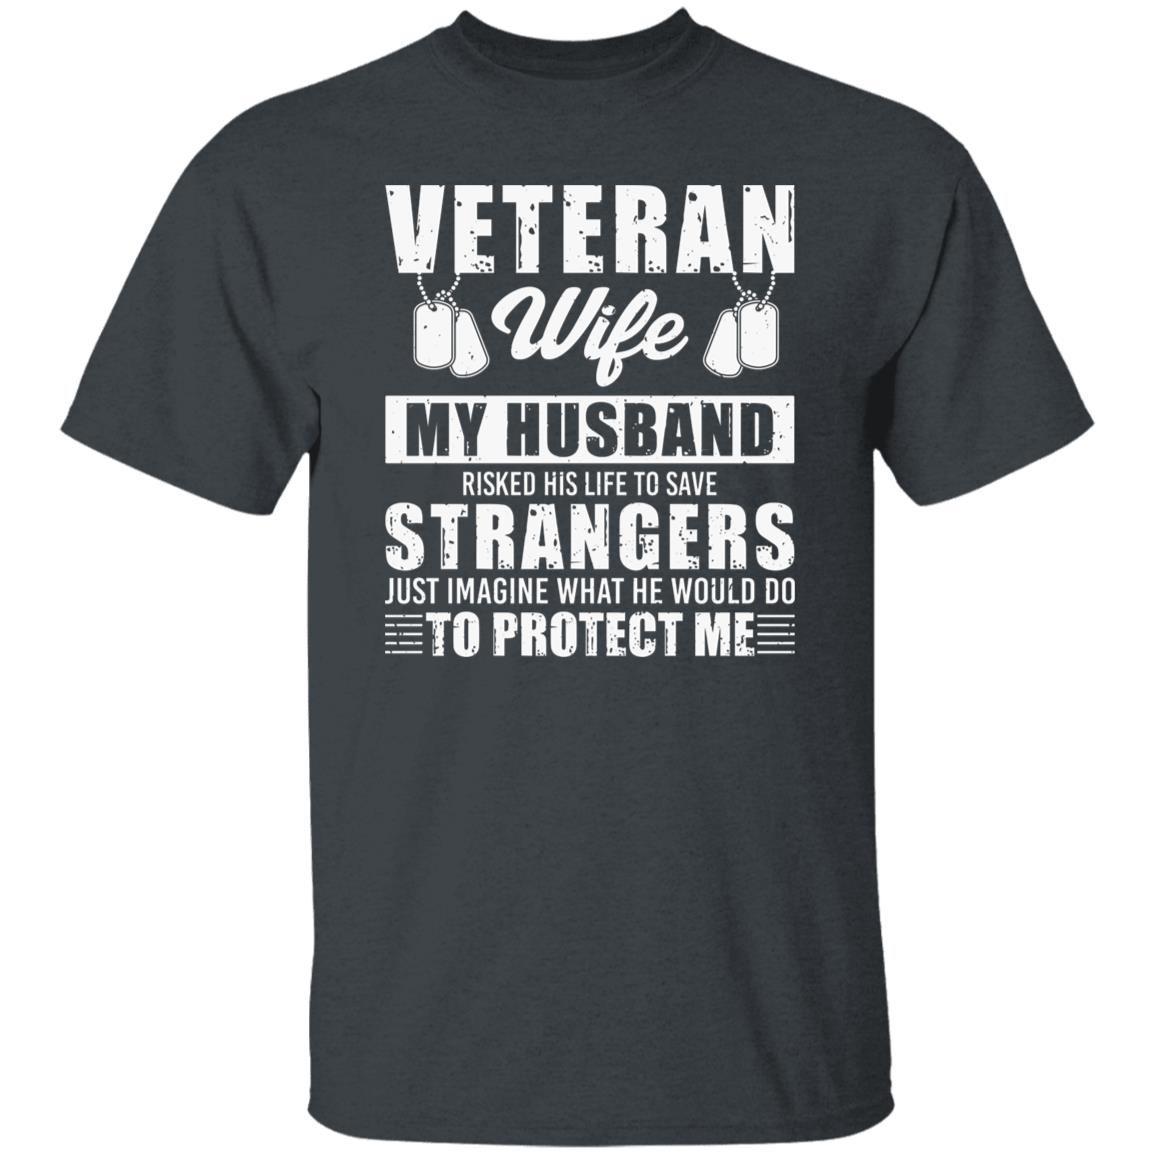 My Husband Risked His Life To Save Strangers Veteran Wife Shirt